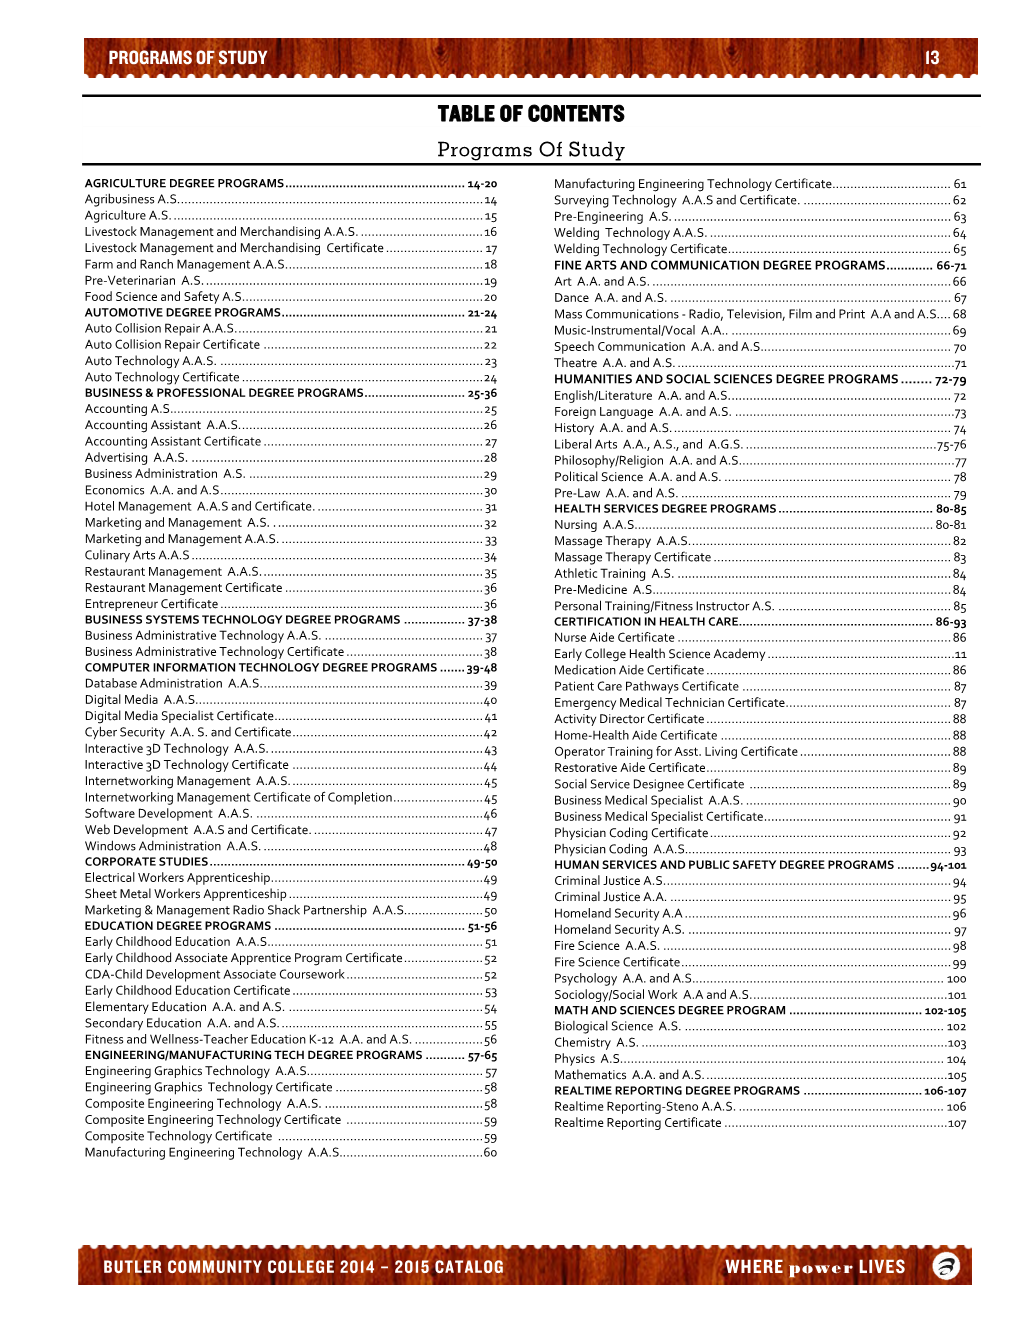 TABLE of CONTENTS Programs of Study